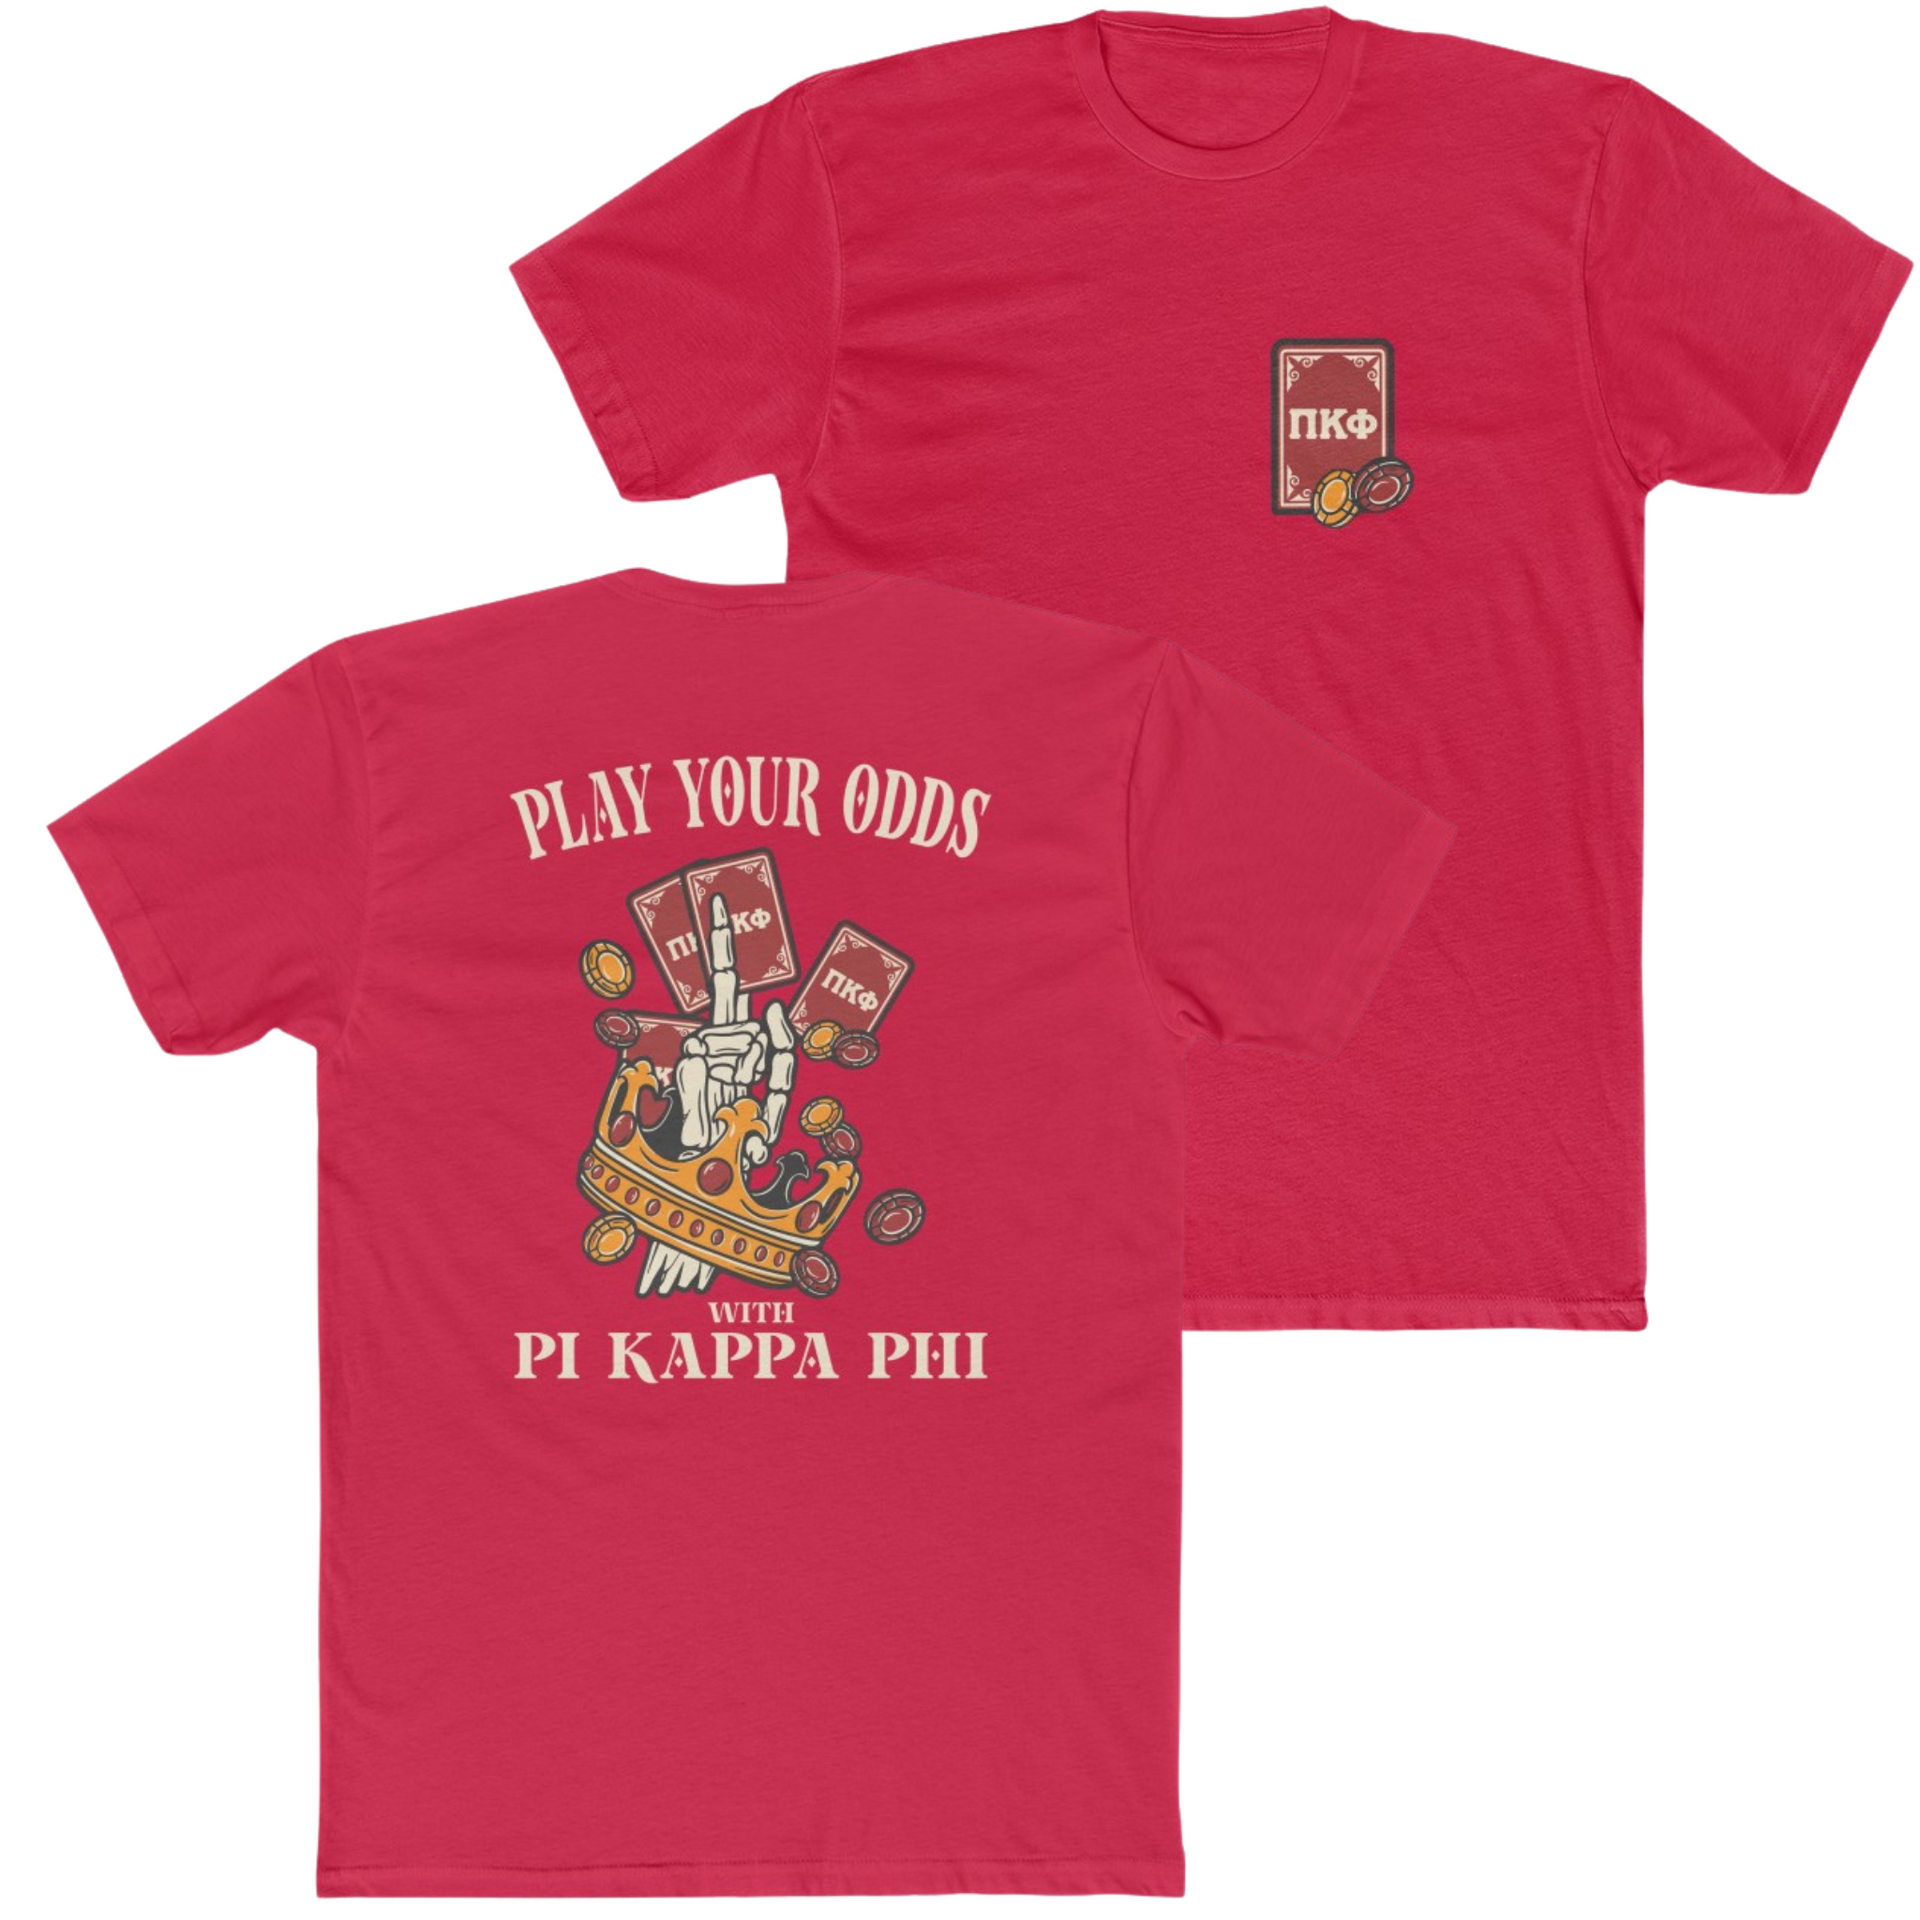 Red Pi Kappa Phi Graphic T-Shirt | Play Your Odds | Pi Kappa Phi Apparel and Merchandise